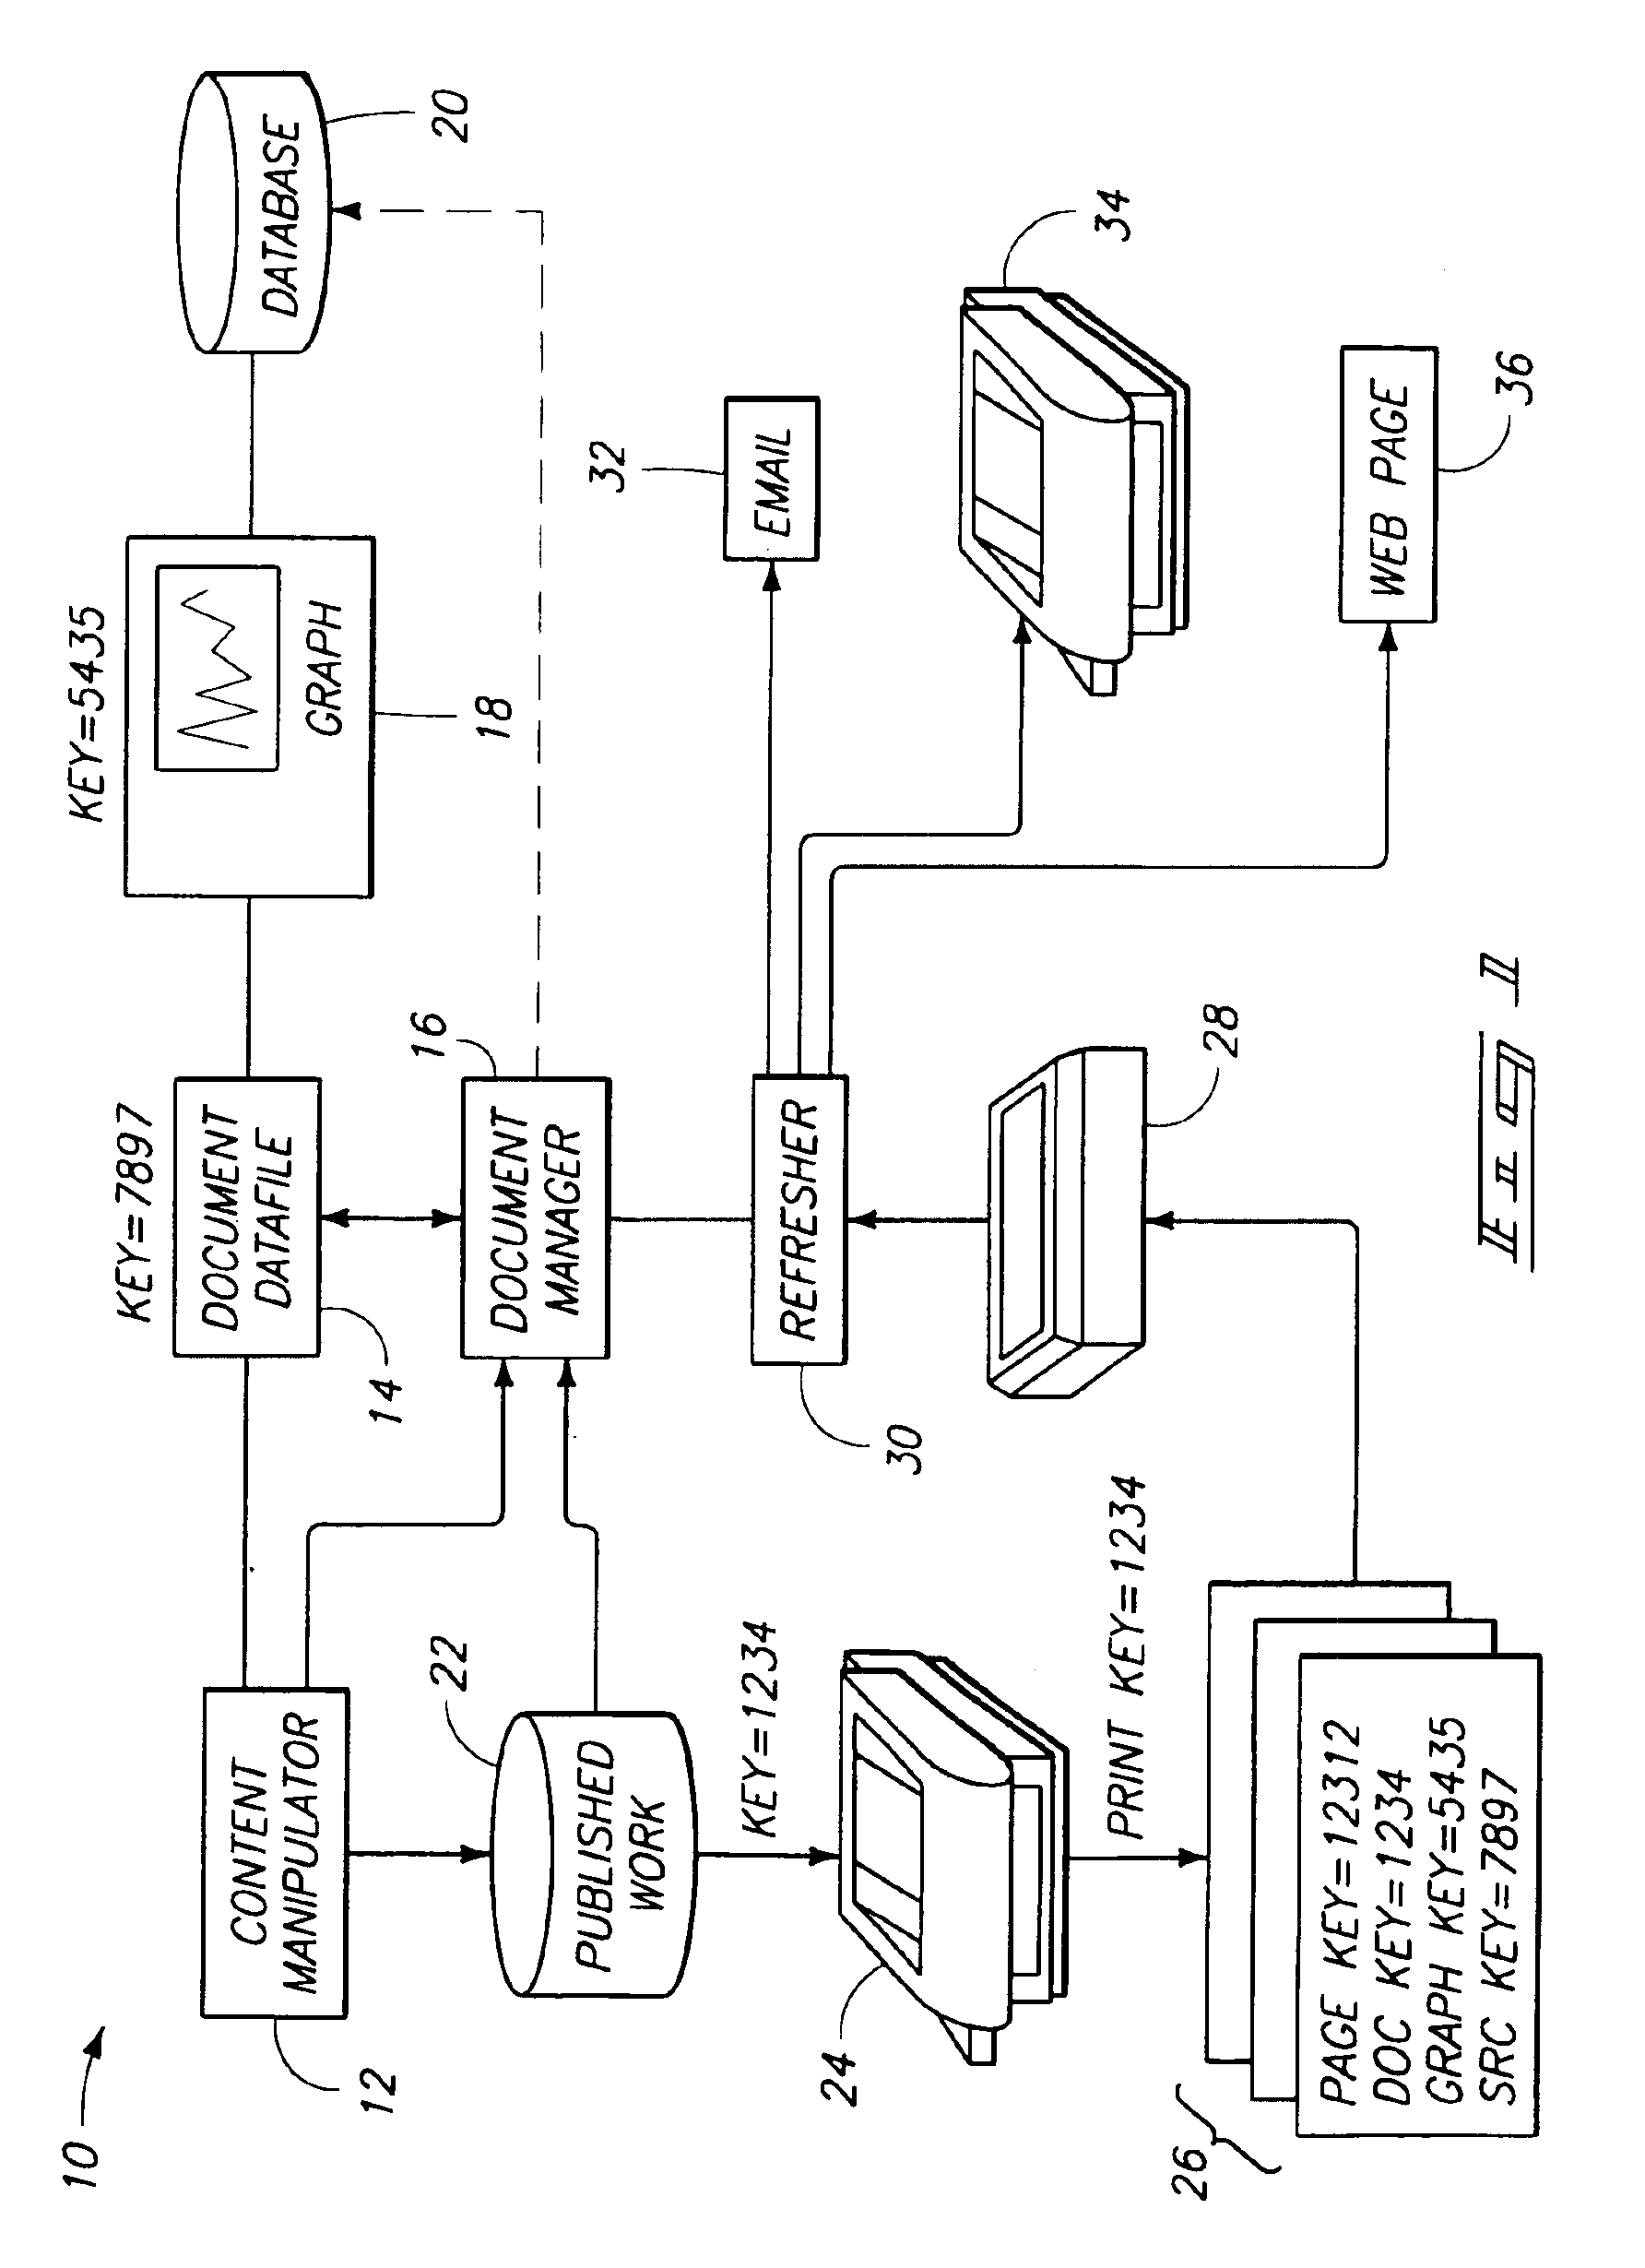 Methods of storing and retrieving information, and methods of document retrieval